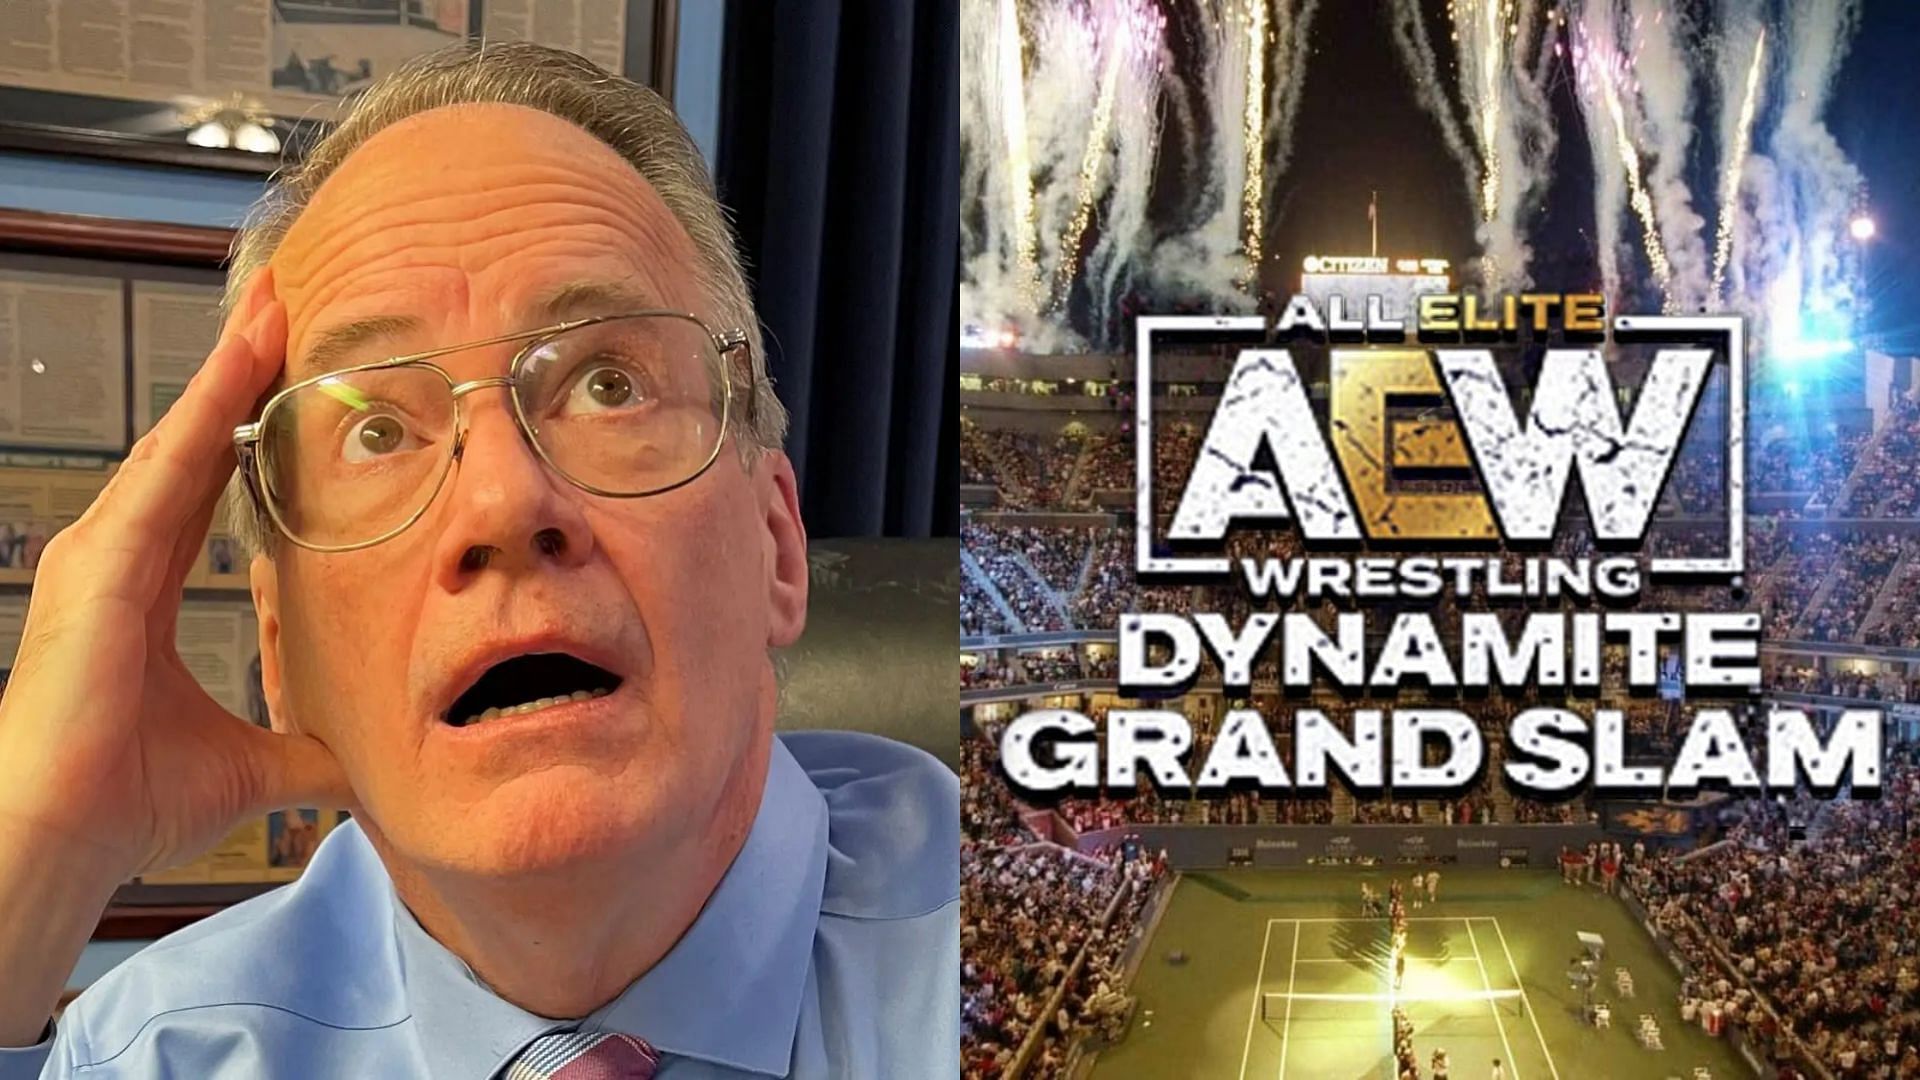 Could AEW have handled this situation better?